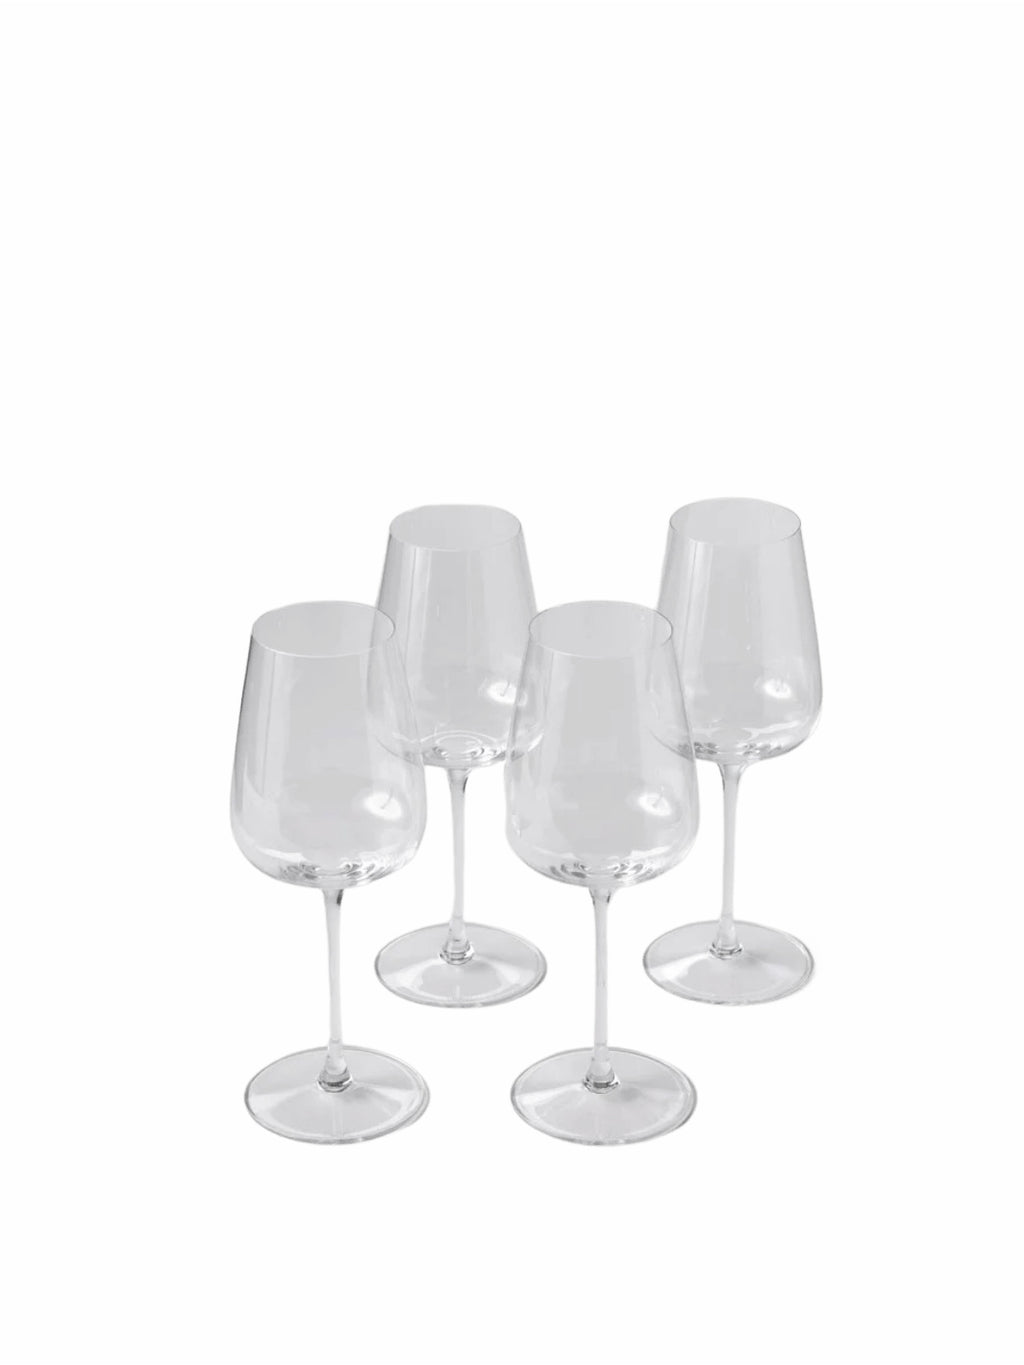 https://eightouncecoffee.ca/cdn/shop/products/fable_the-wine-glasses.jpg?v=1672776597&width=1024